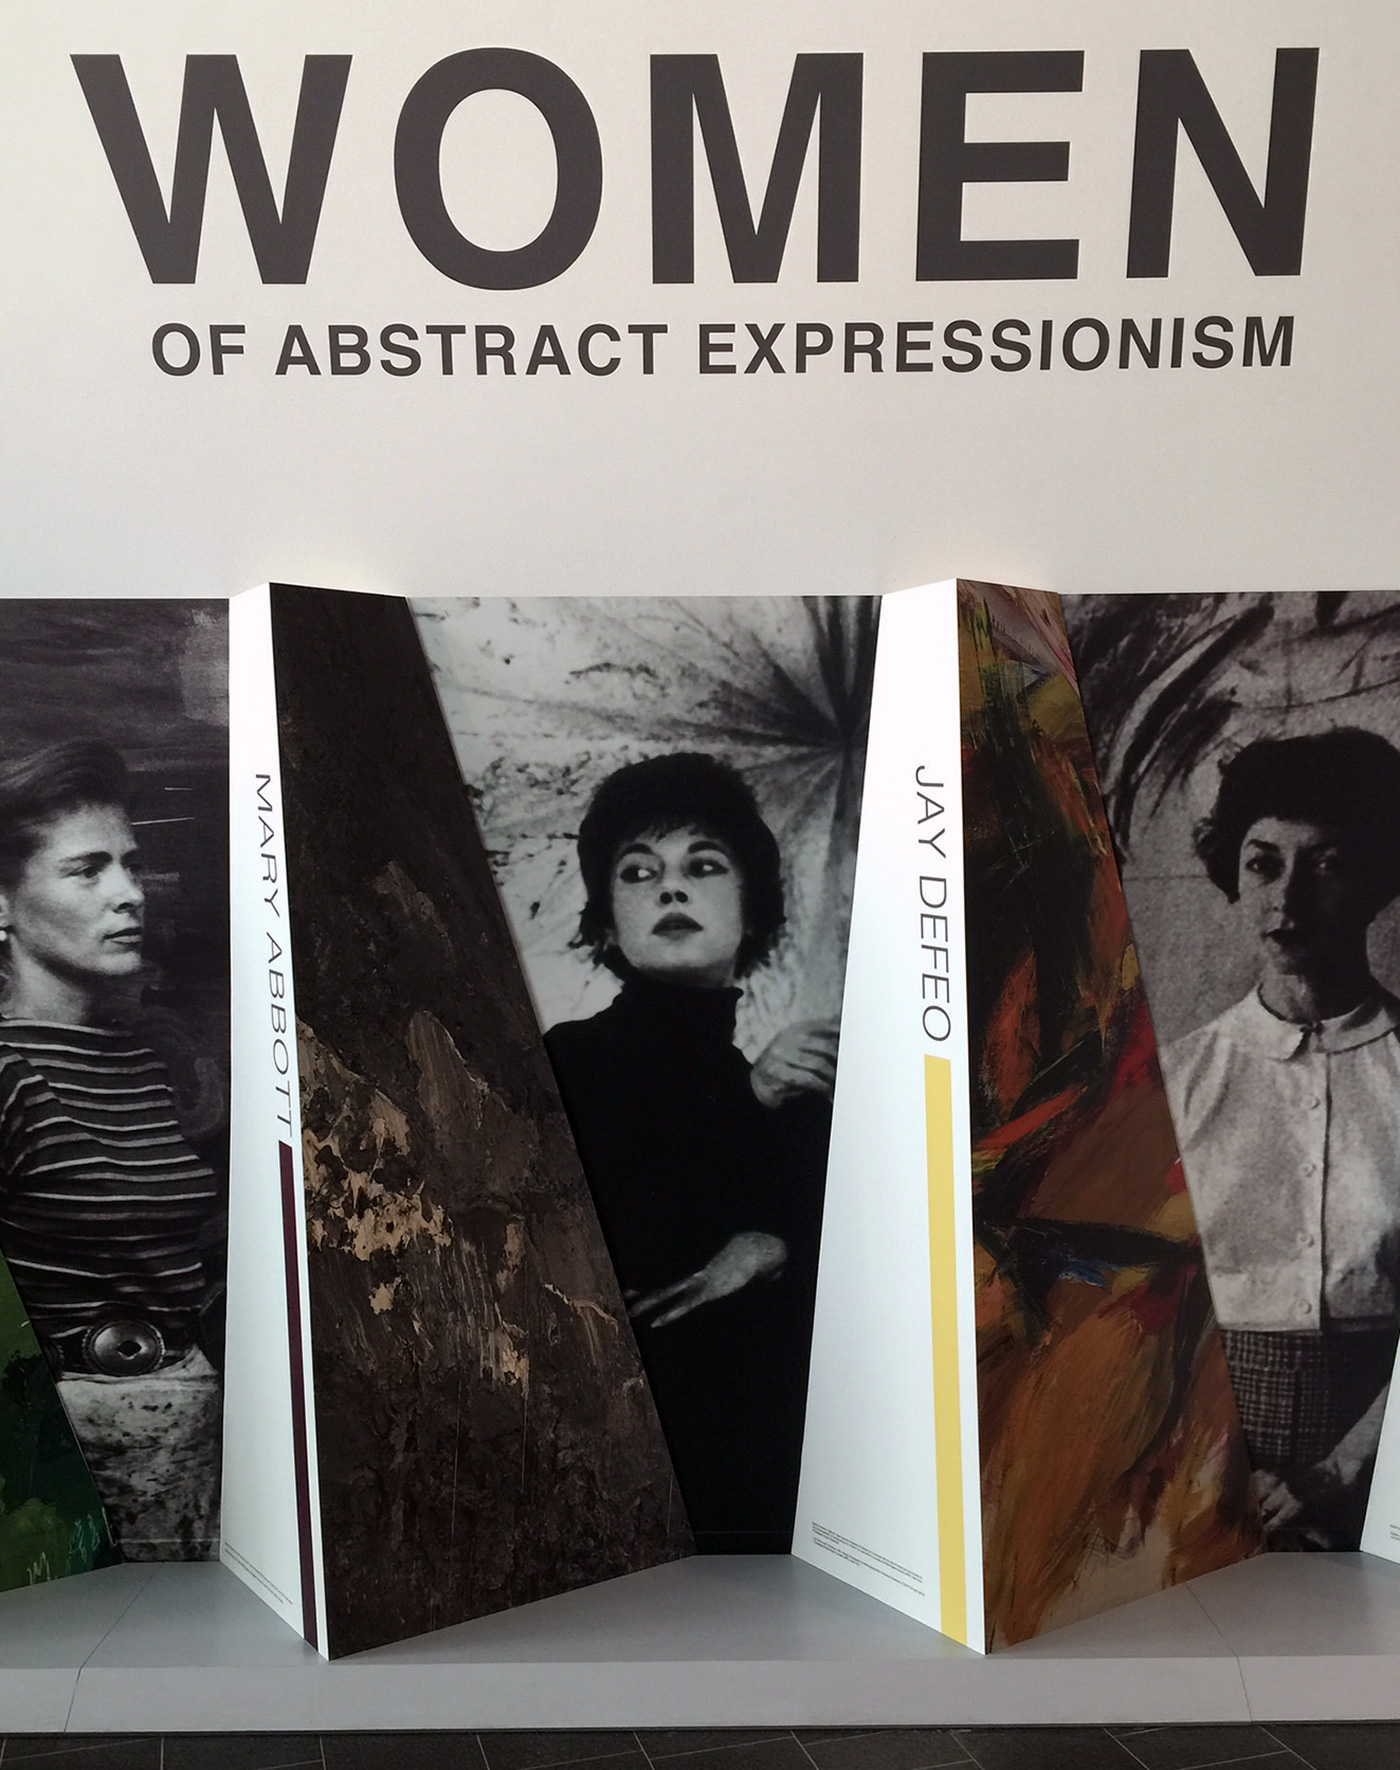 From the entrance to the "Women Of Abstract Expressionism" exhibition in Denver (all photos by Hrag Vartanian/Hyperallergic)